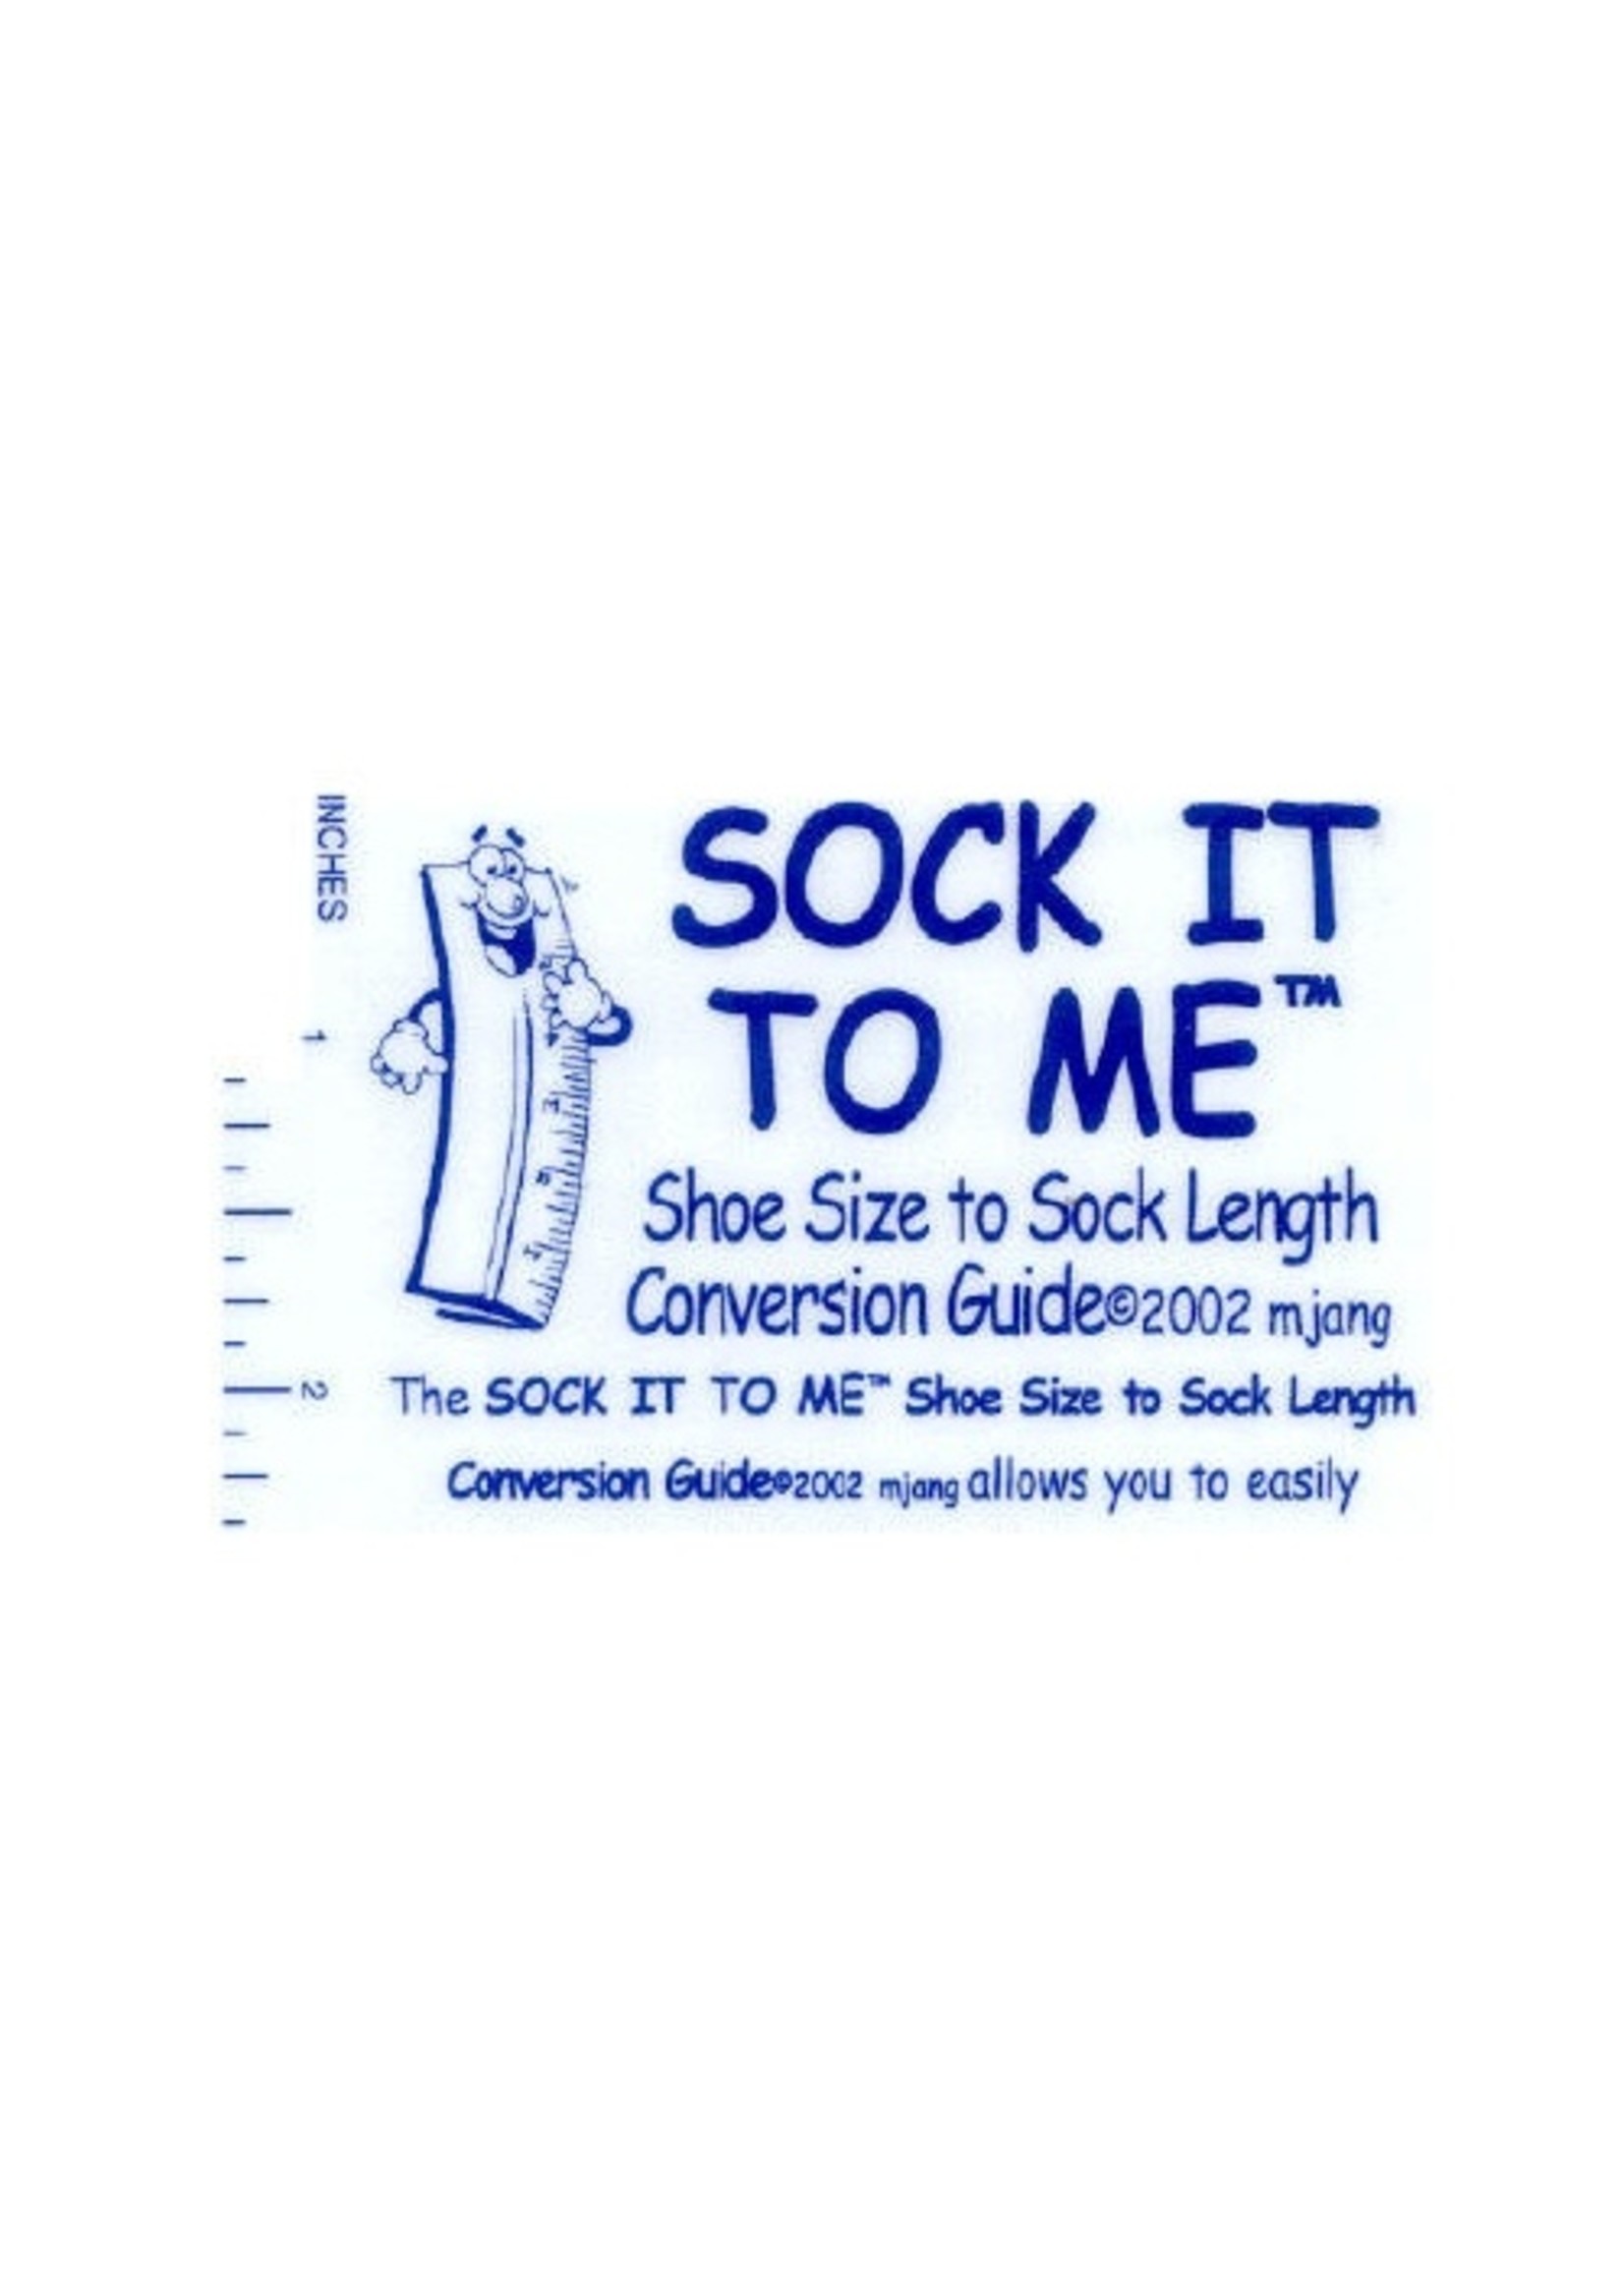 BRYSON SOCK IT TO ME SOCK CONVERSION GUIDE